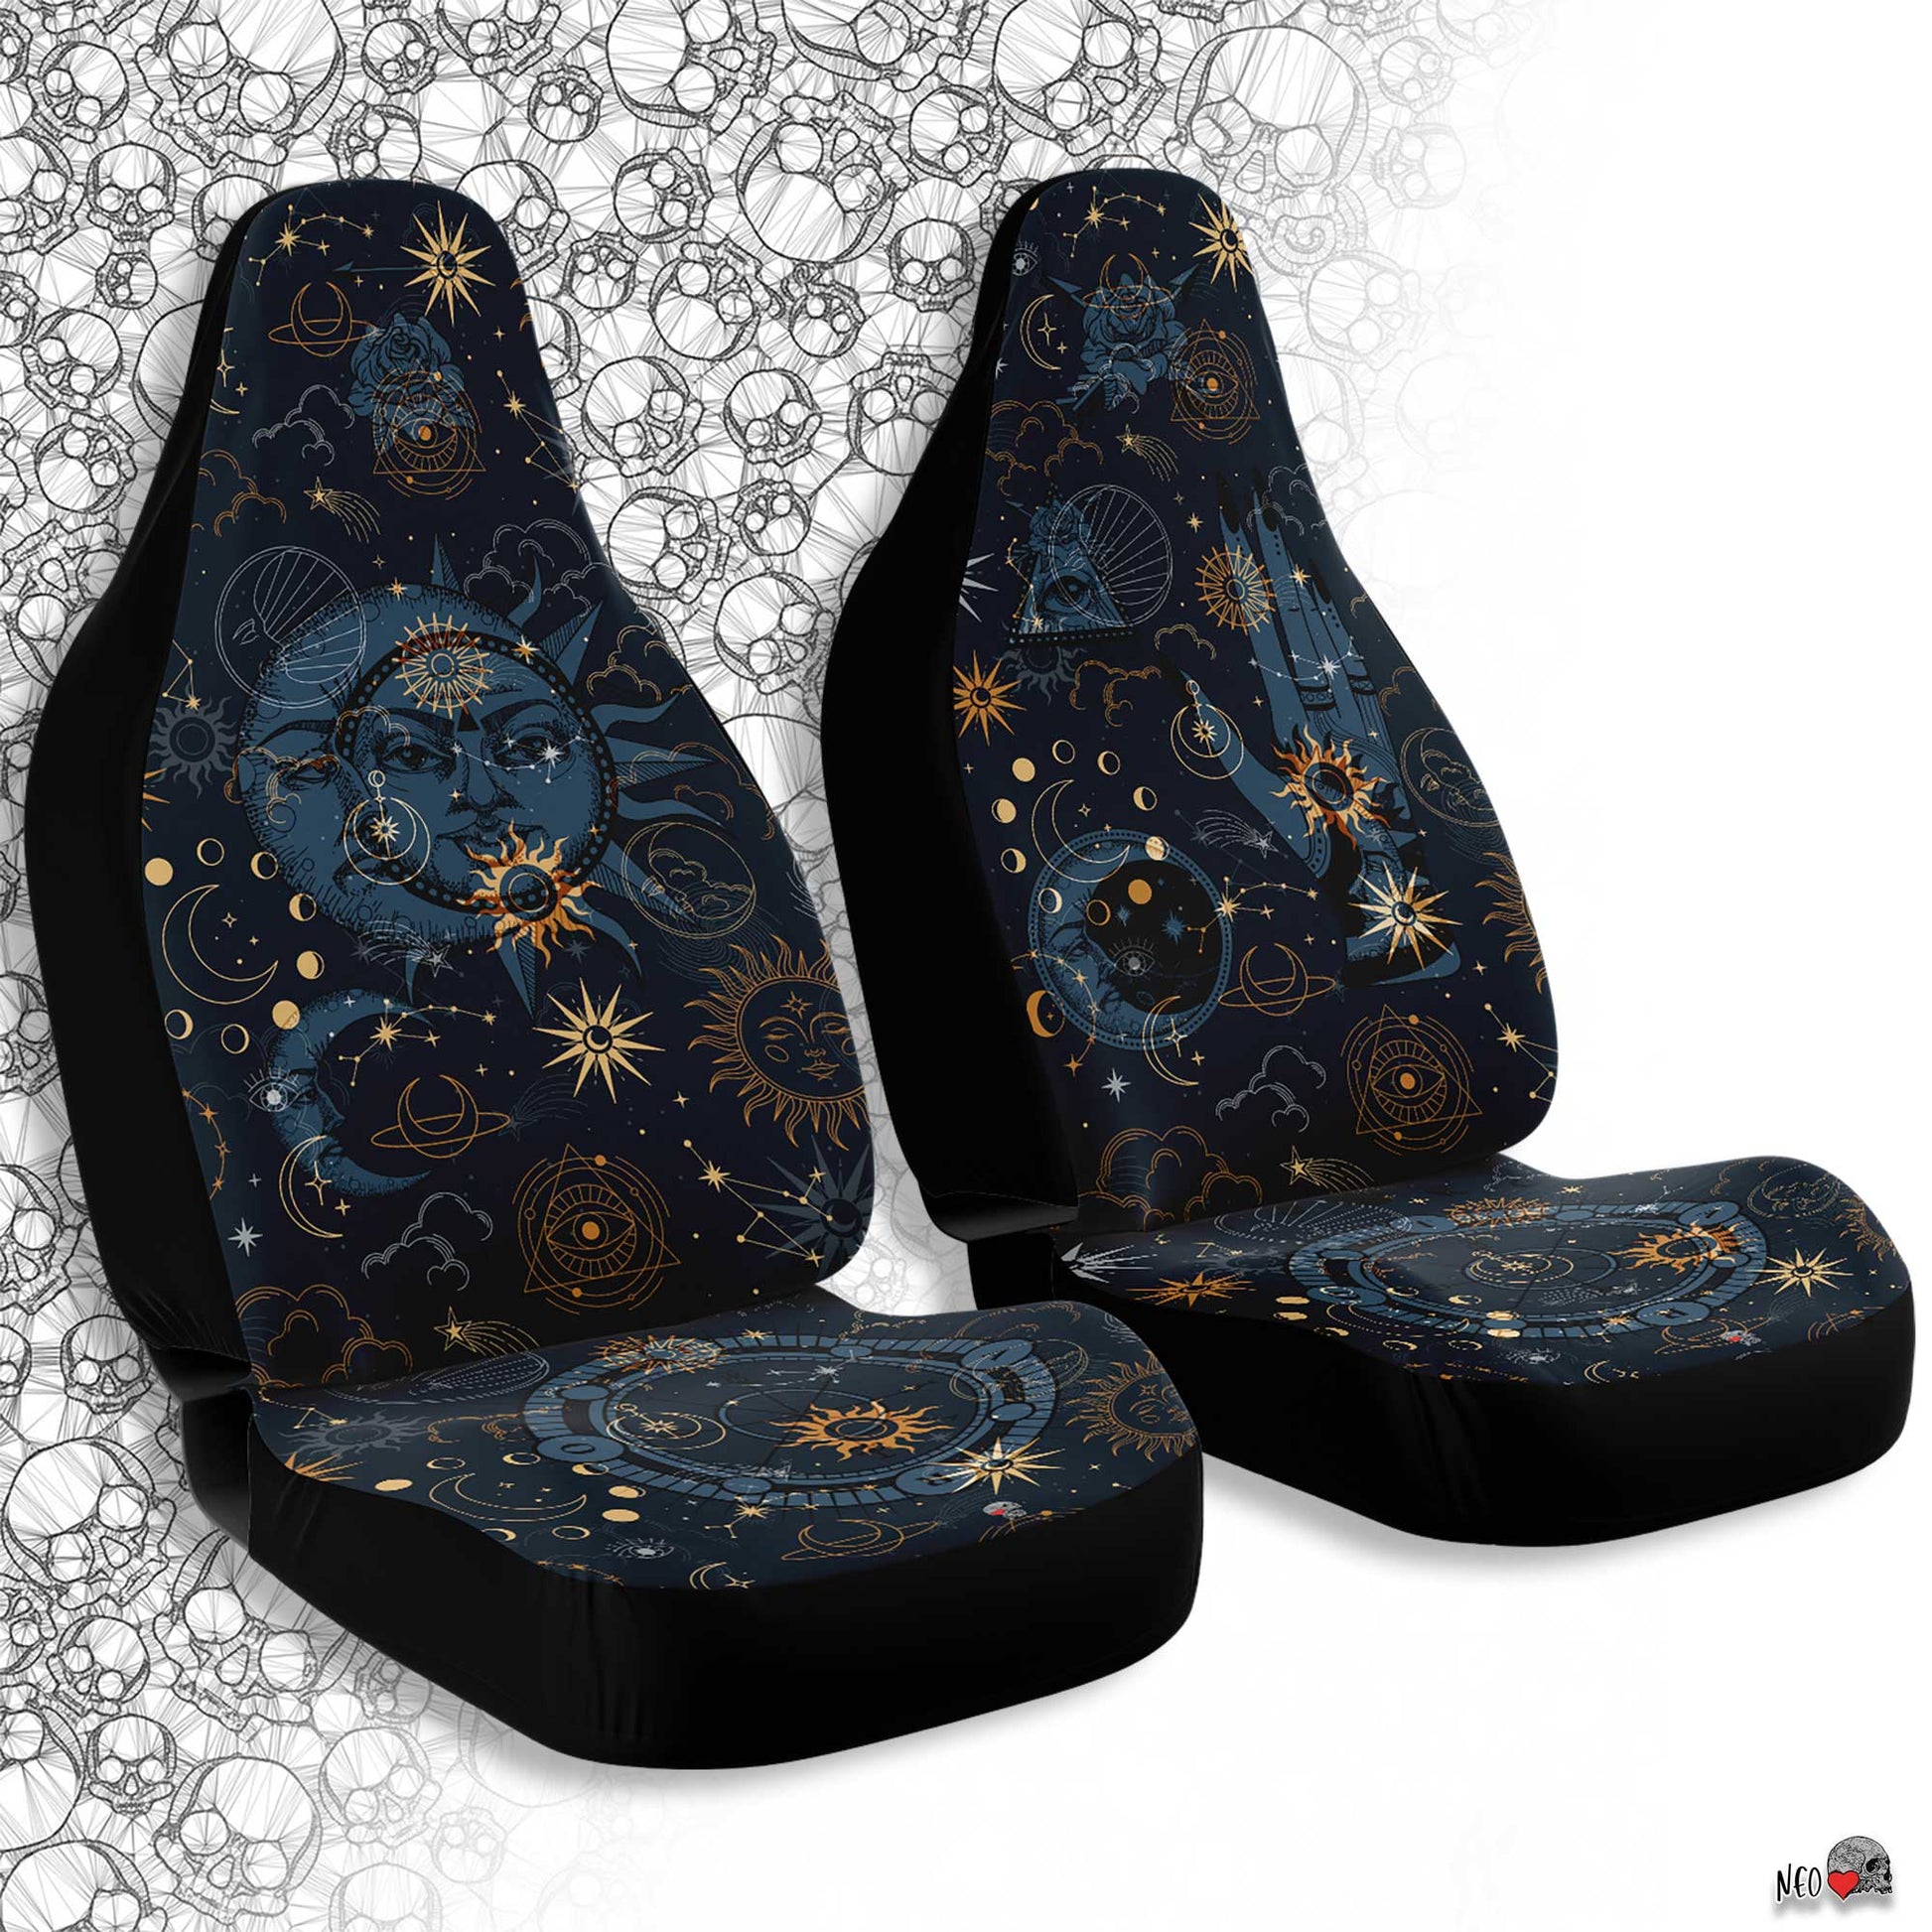 moon car seat covers - neoskull